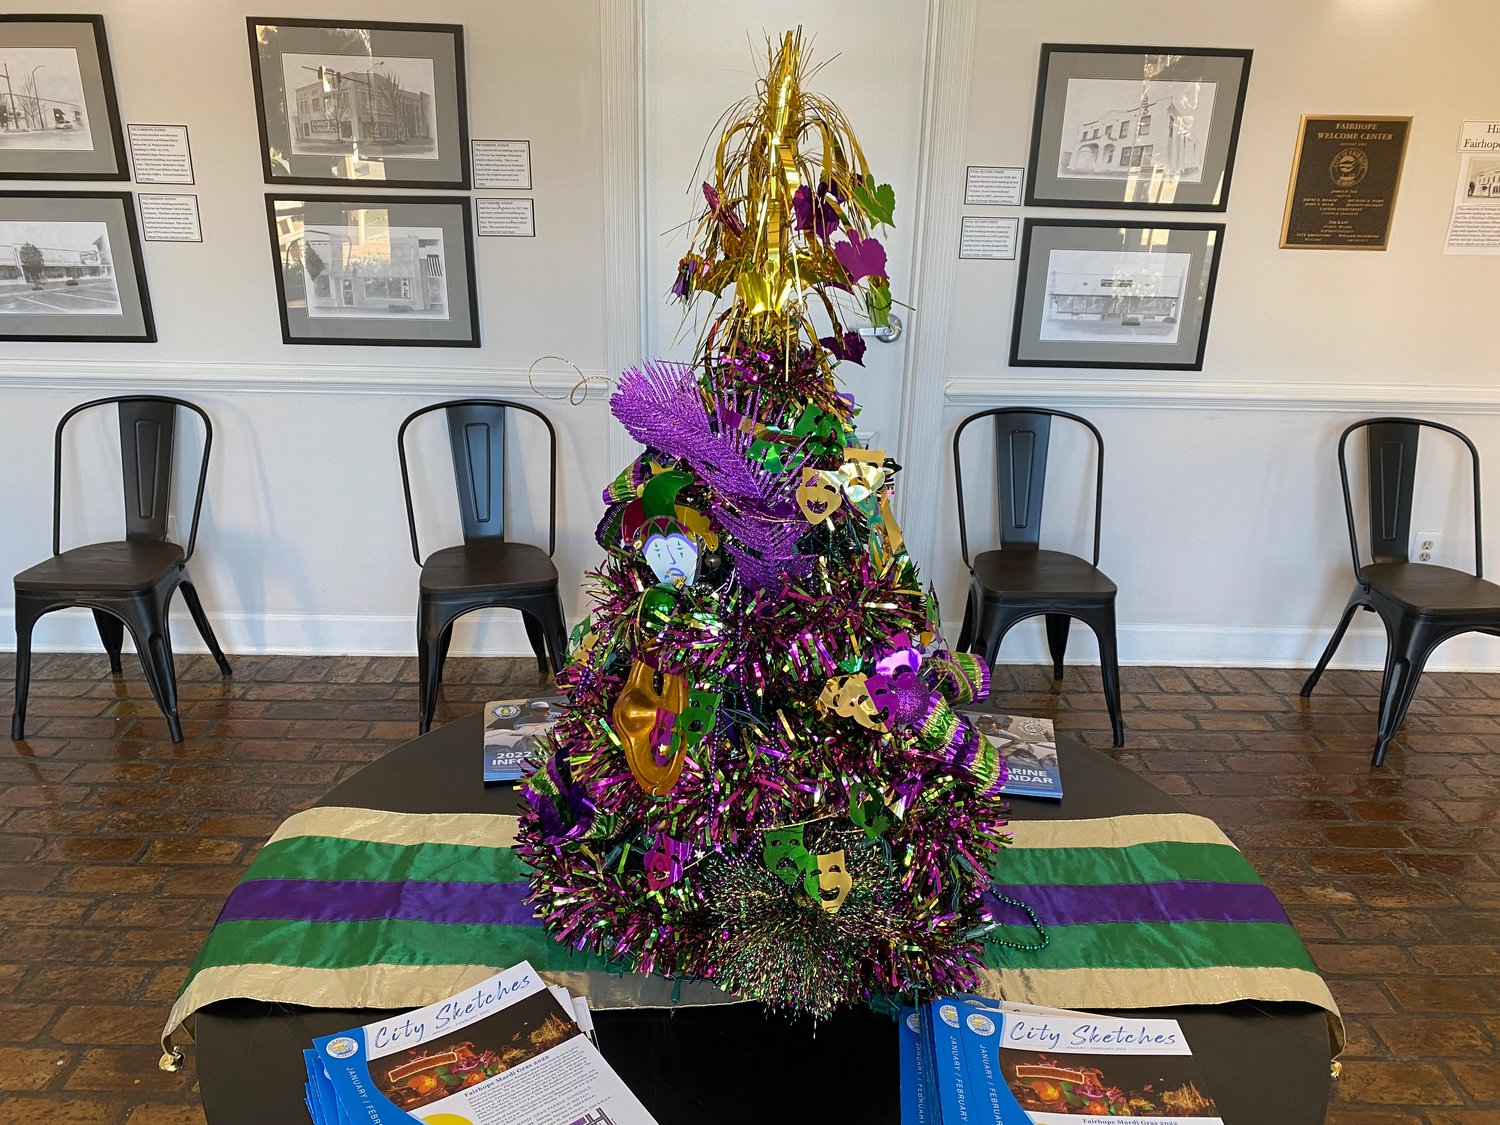 Guests to the Fairhope Visitors Center are greeted by a small table top tree.